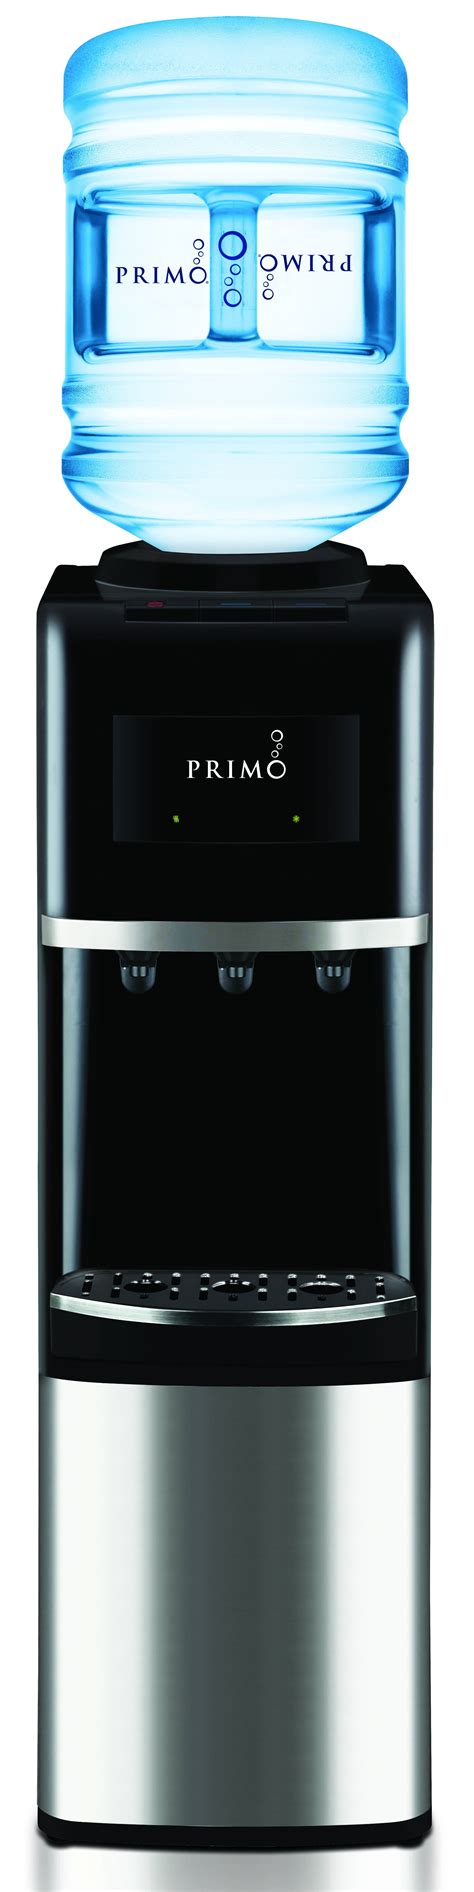 Primo Water Dispenser Top Loading Hot Cold Room Temperature Stainless Walmart Com